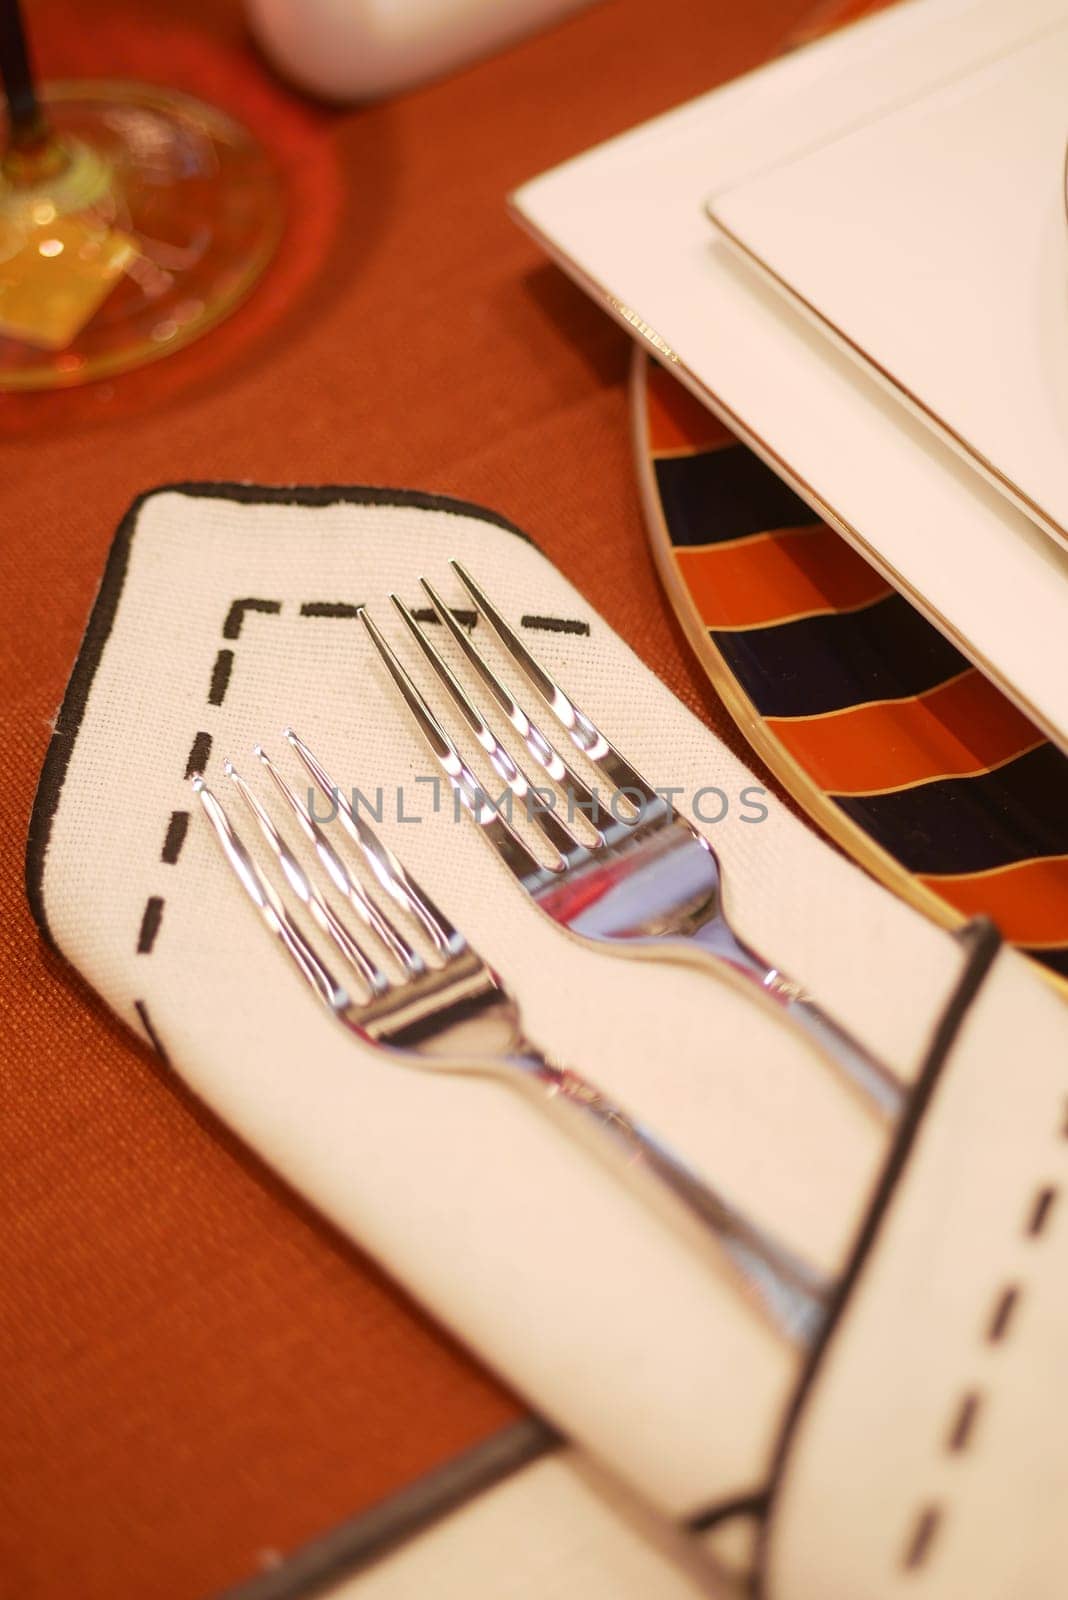 Two forks displayed on a wooden table with a napkin underneath by towfiq007